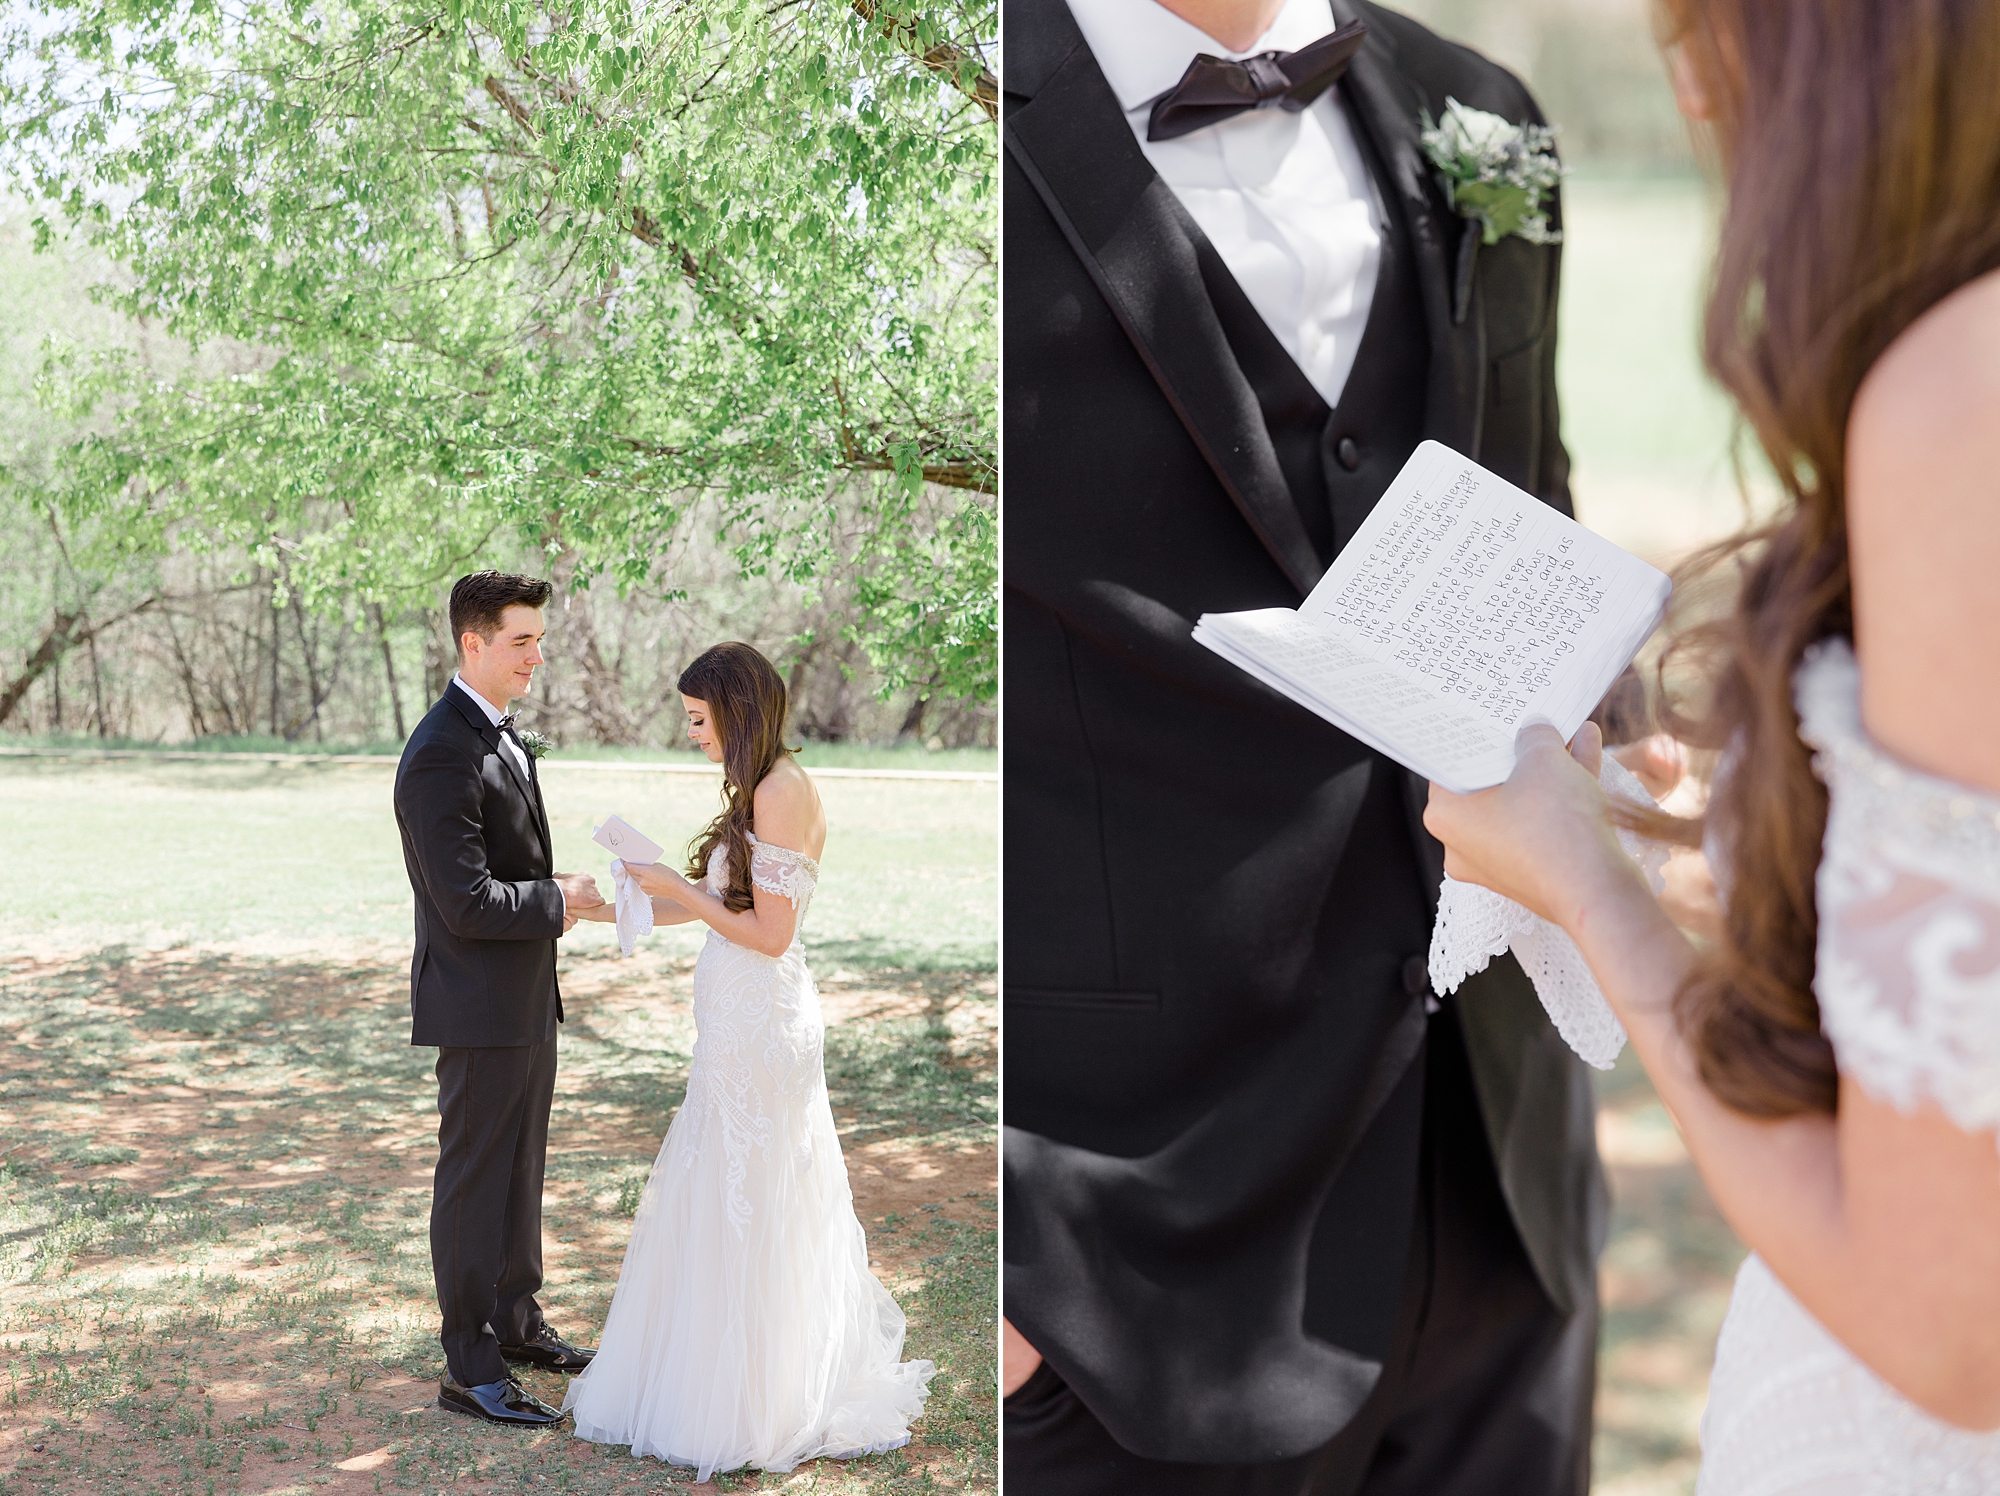 bride reads vows to groom during intimate Sedona wedding day